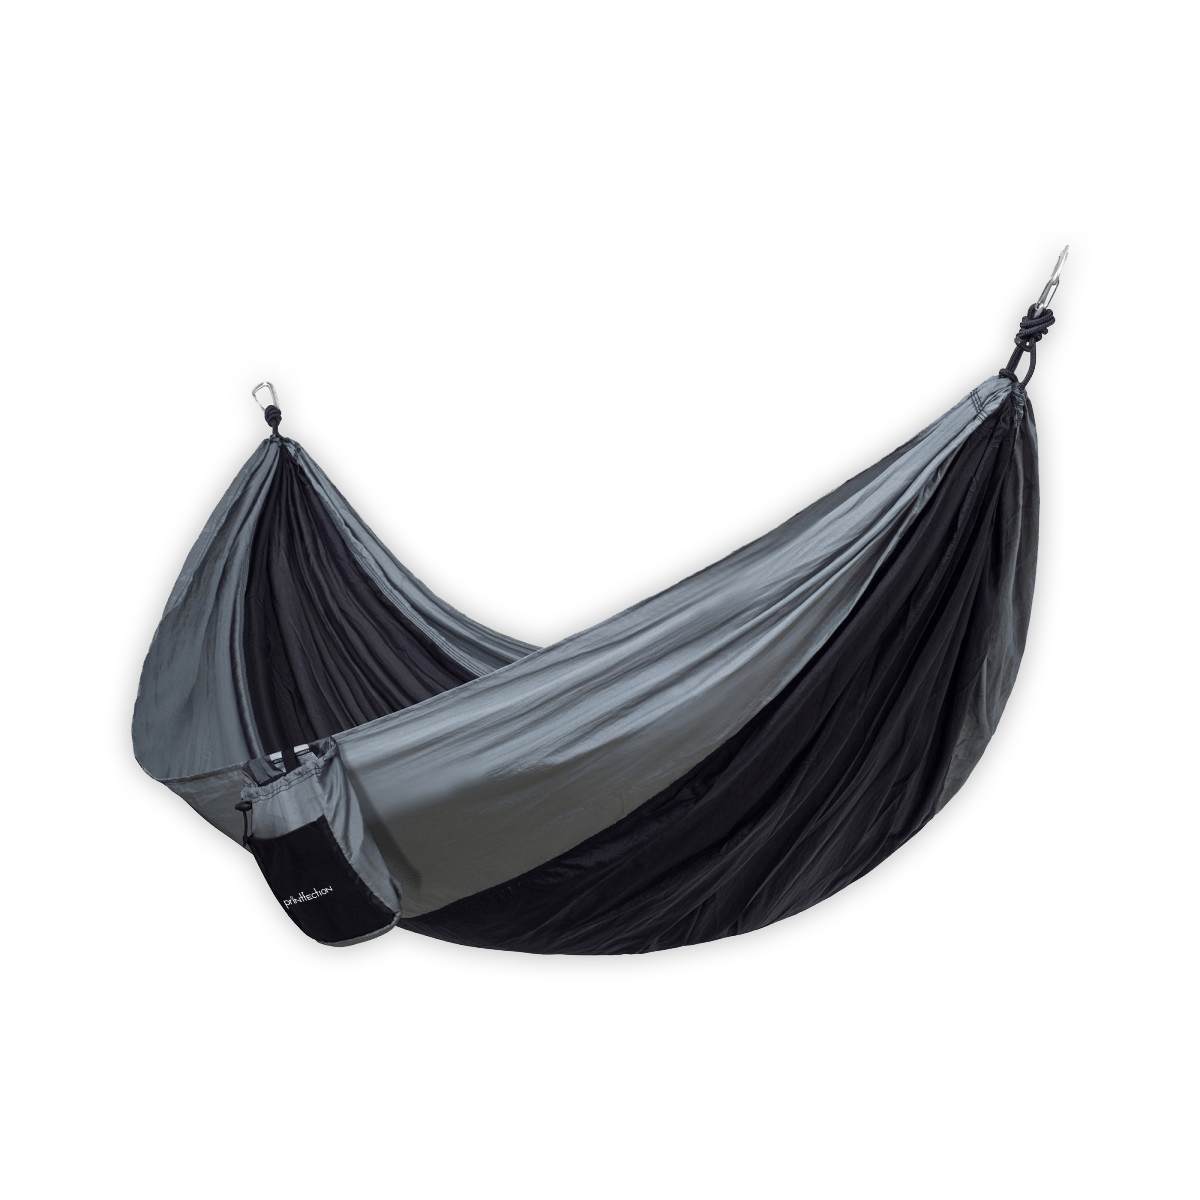 a hammock with a company's logo printed on it